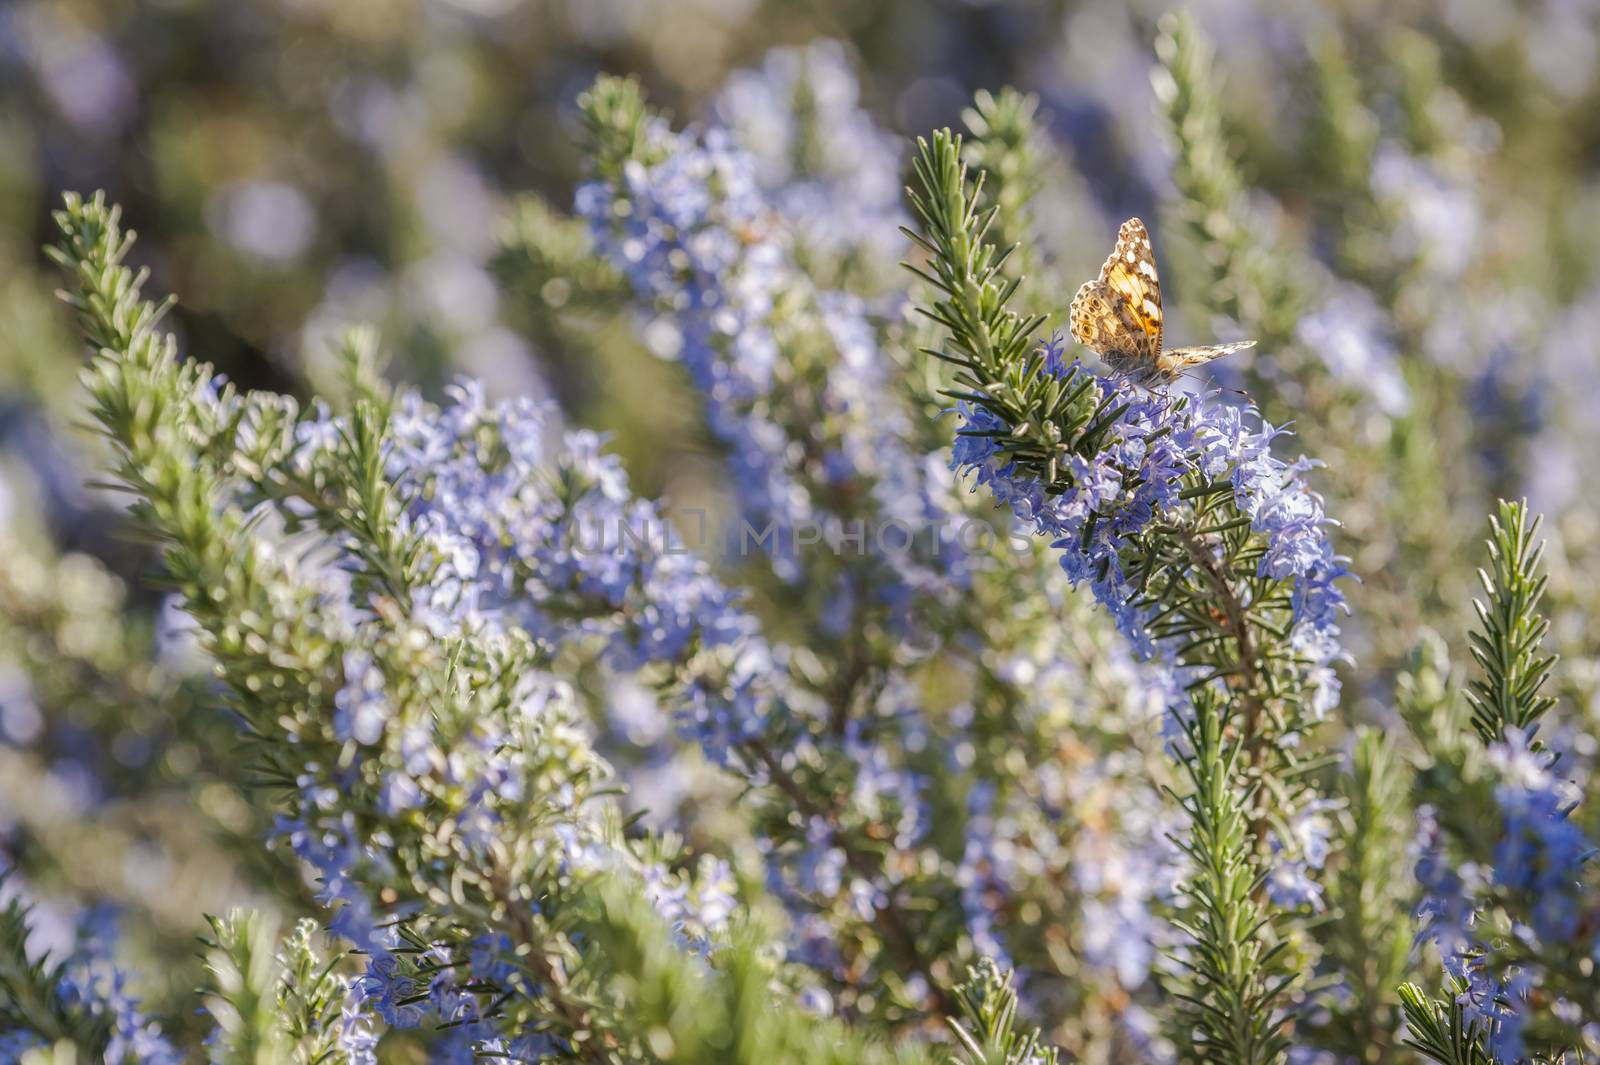 Rosemary plant closeup with blue flowers in full bloom.